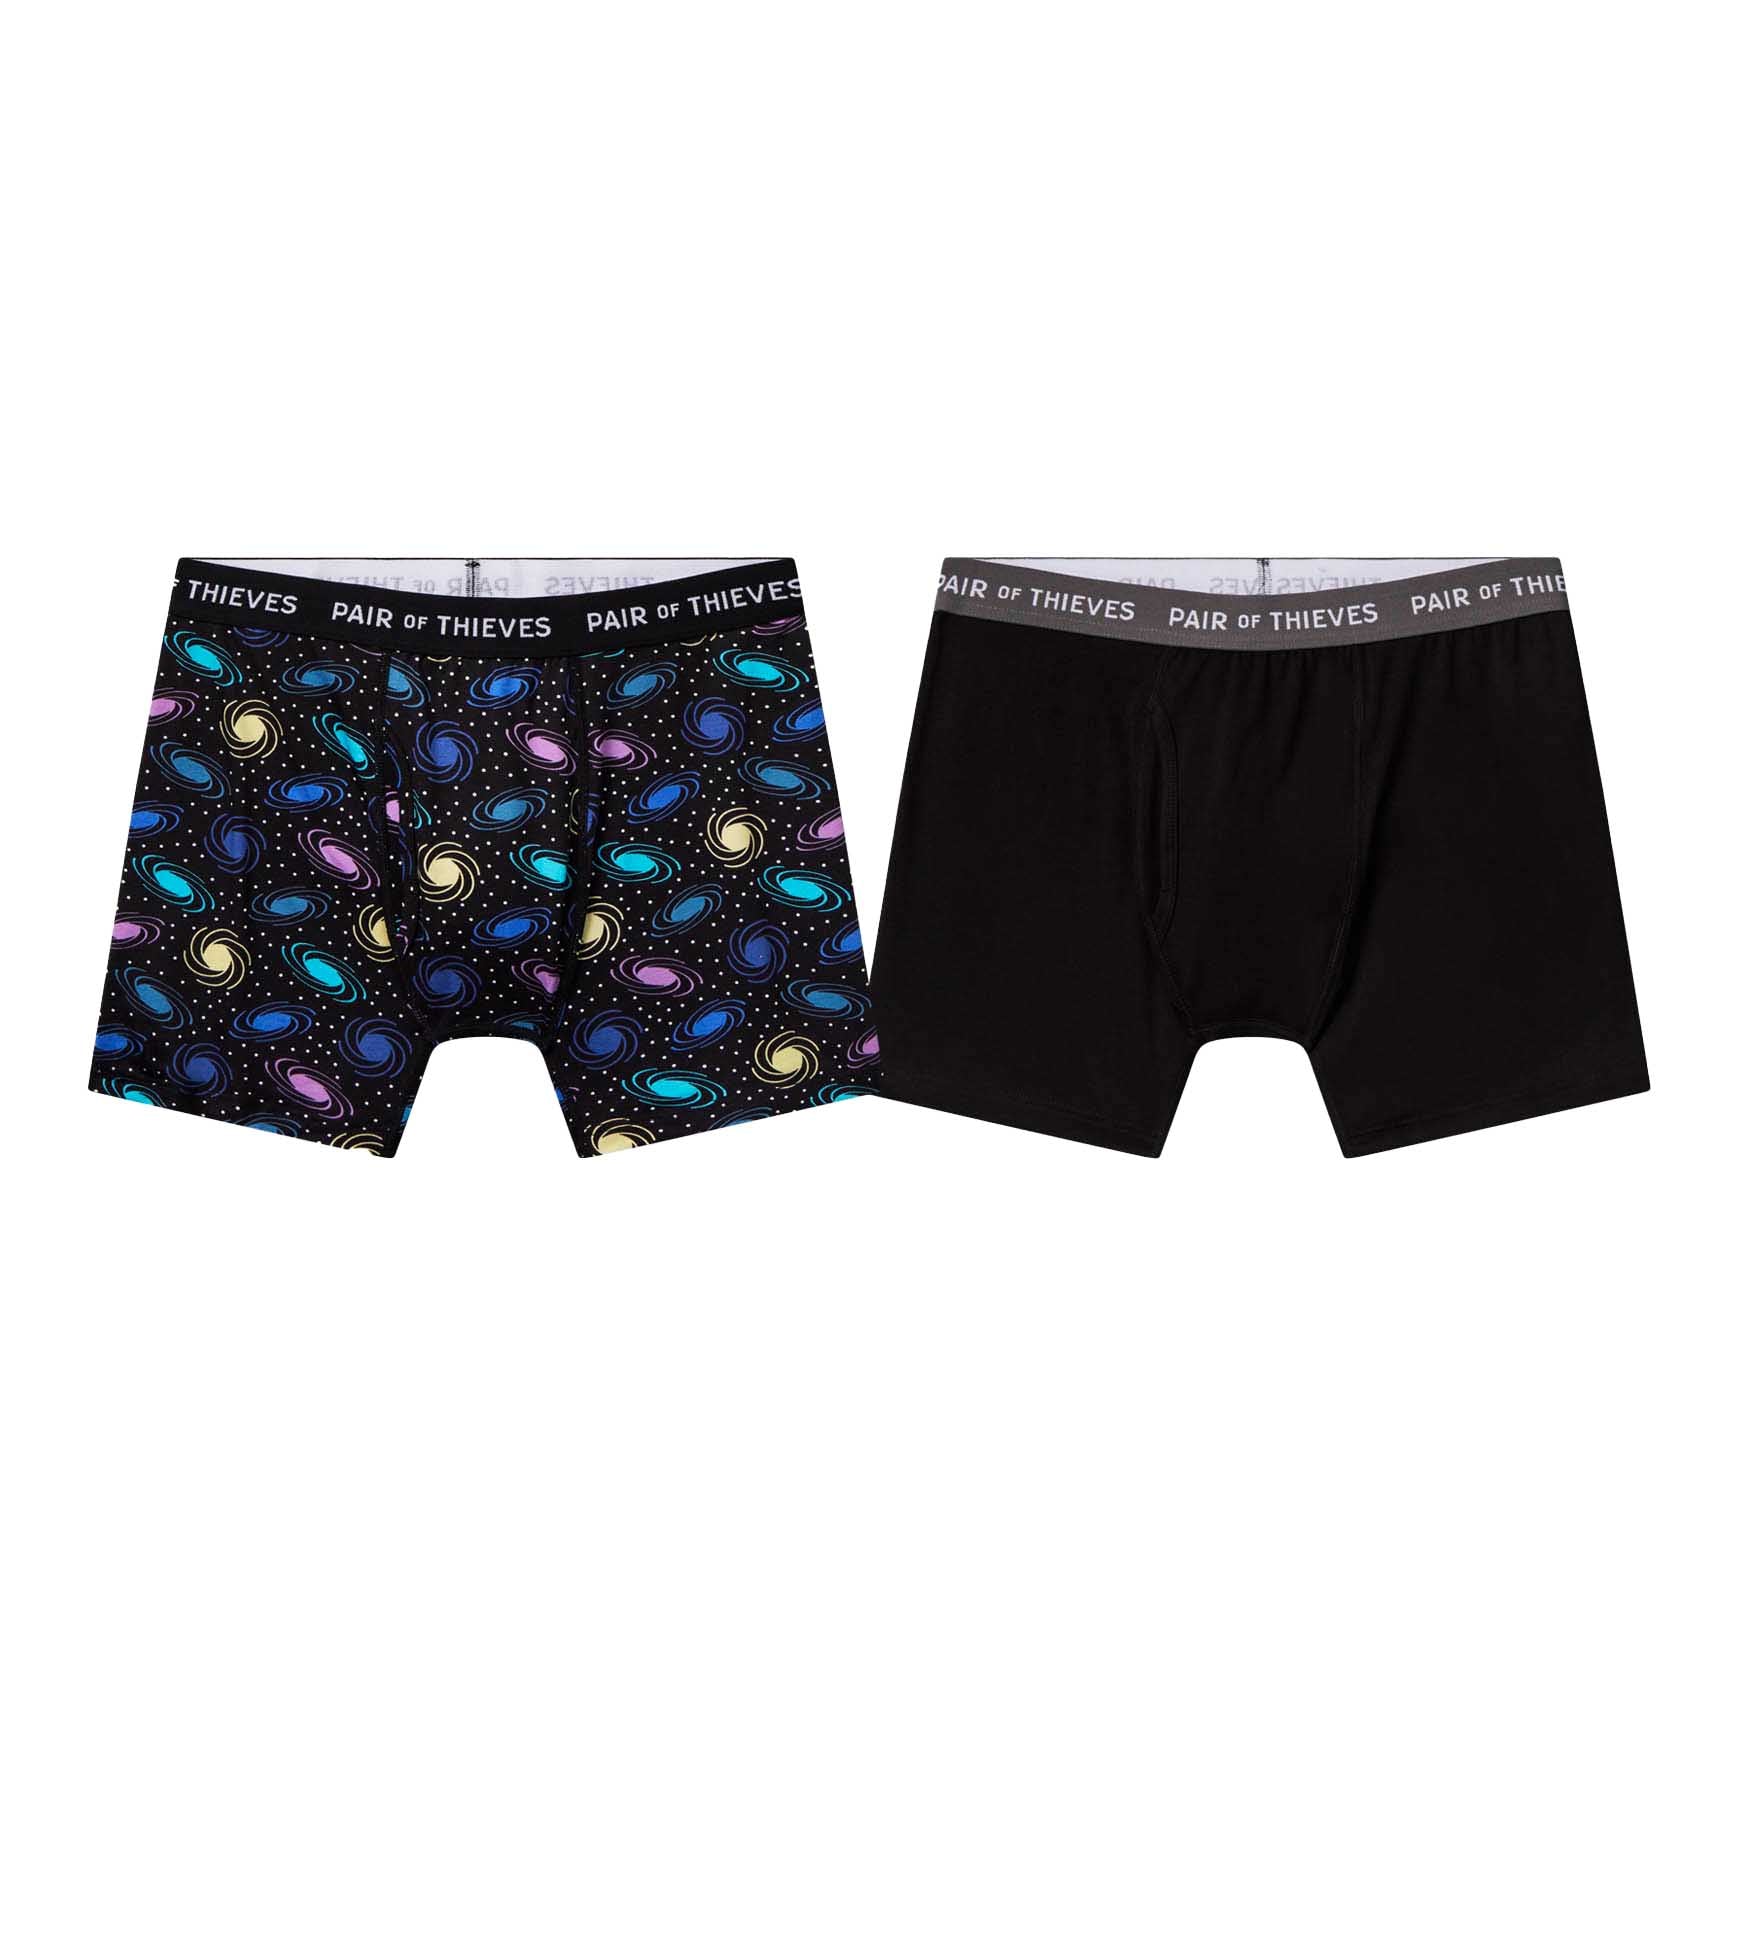 Peace boxer briefs 2-pack, Pair of Thieves